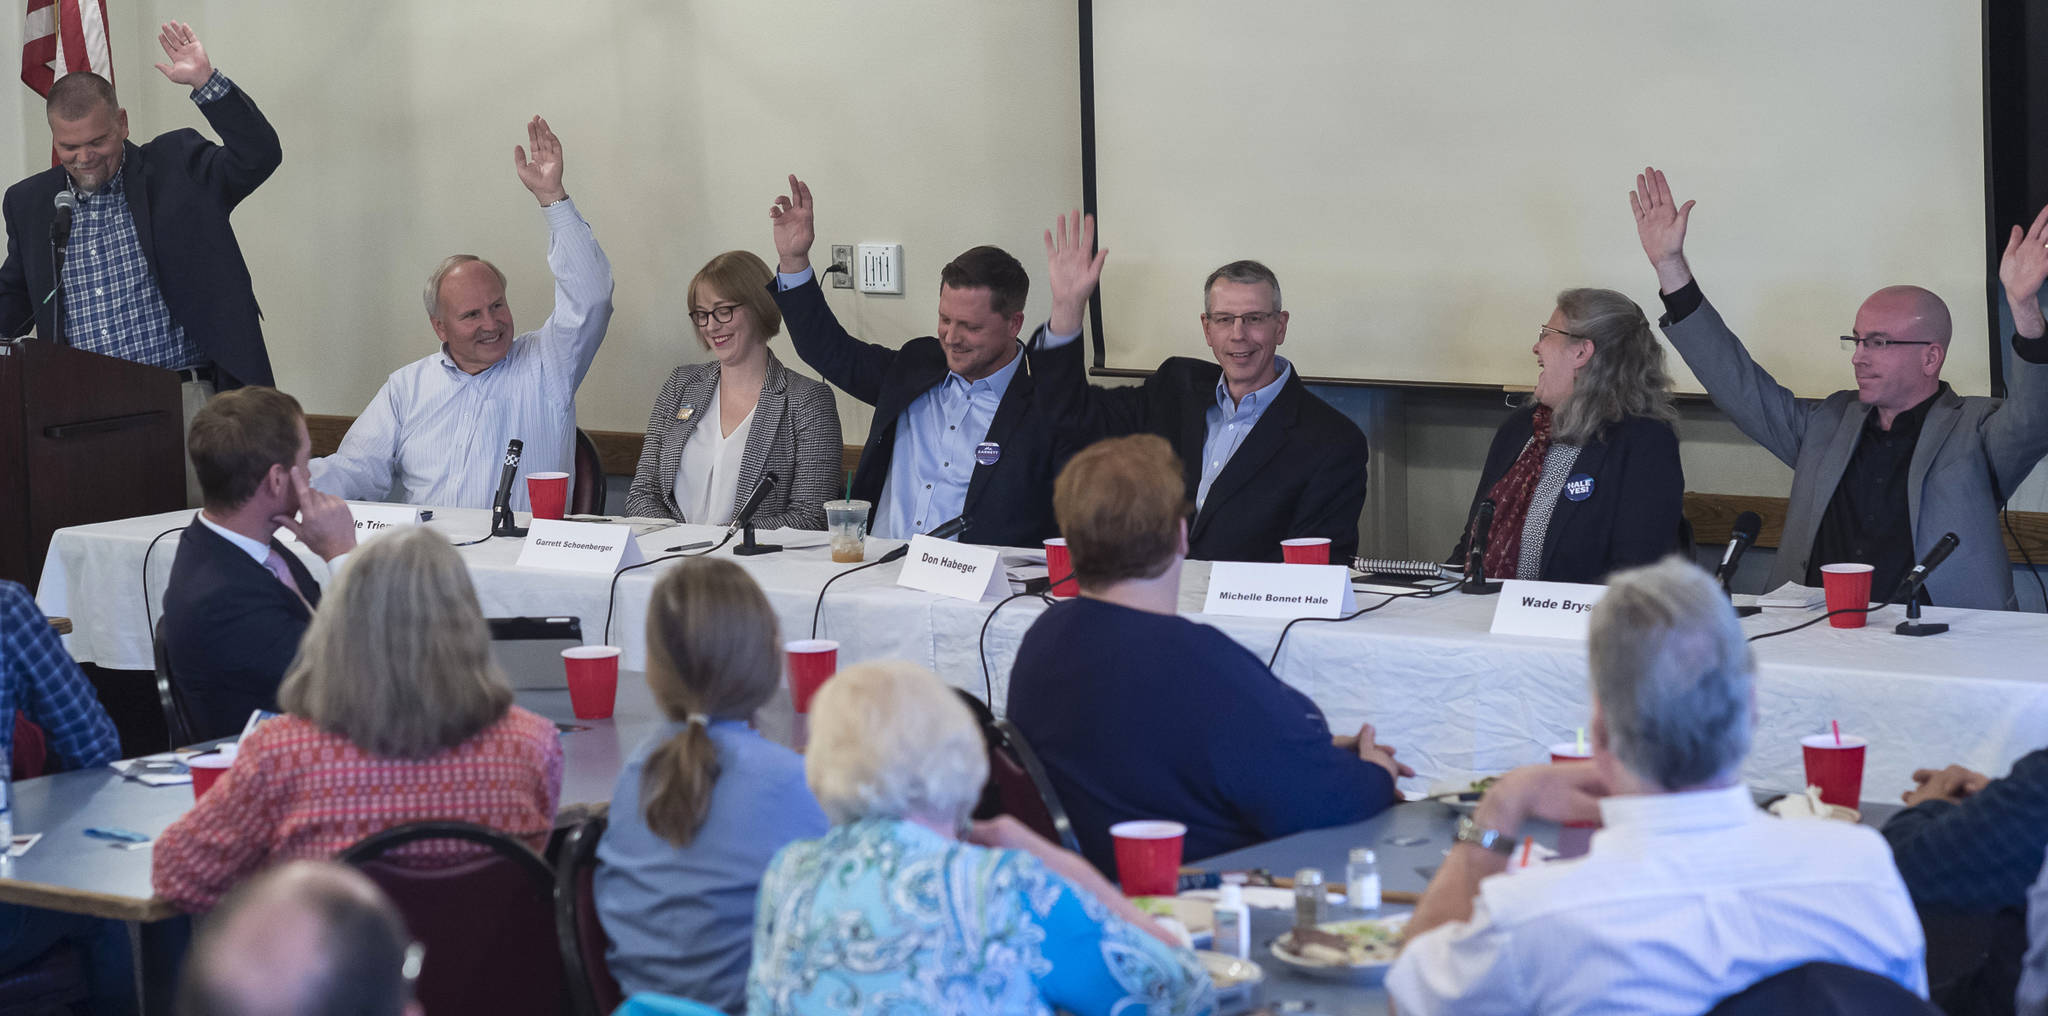 Juneau Assembly candidates for the Areawide and District 2 seats are asked to raise their hand if they support the Juneau Access Project during a forum at the Juneau Chamber of Commerce during its weekly luncheon at the Moose Lodge on Thursday, Sept. 20, 2018. District 2 candidate Emil Mackey did not attend the event because of work travel. (Michael Penn | Juneau Empire)